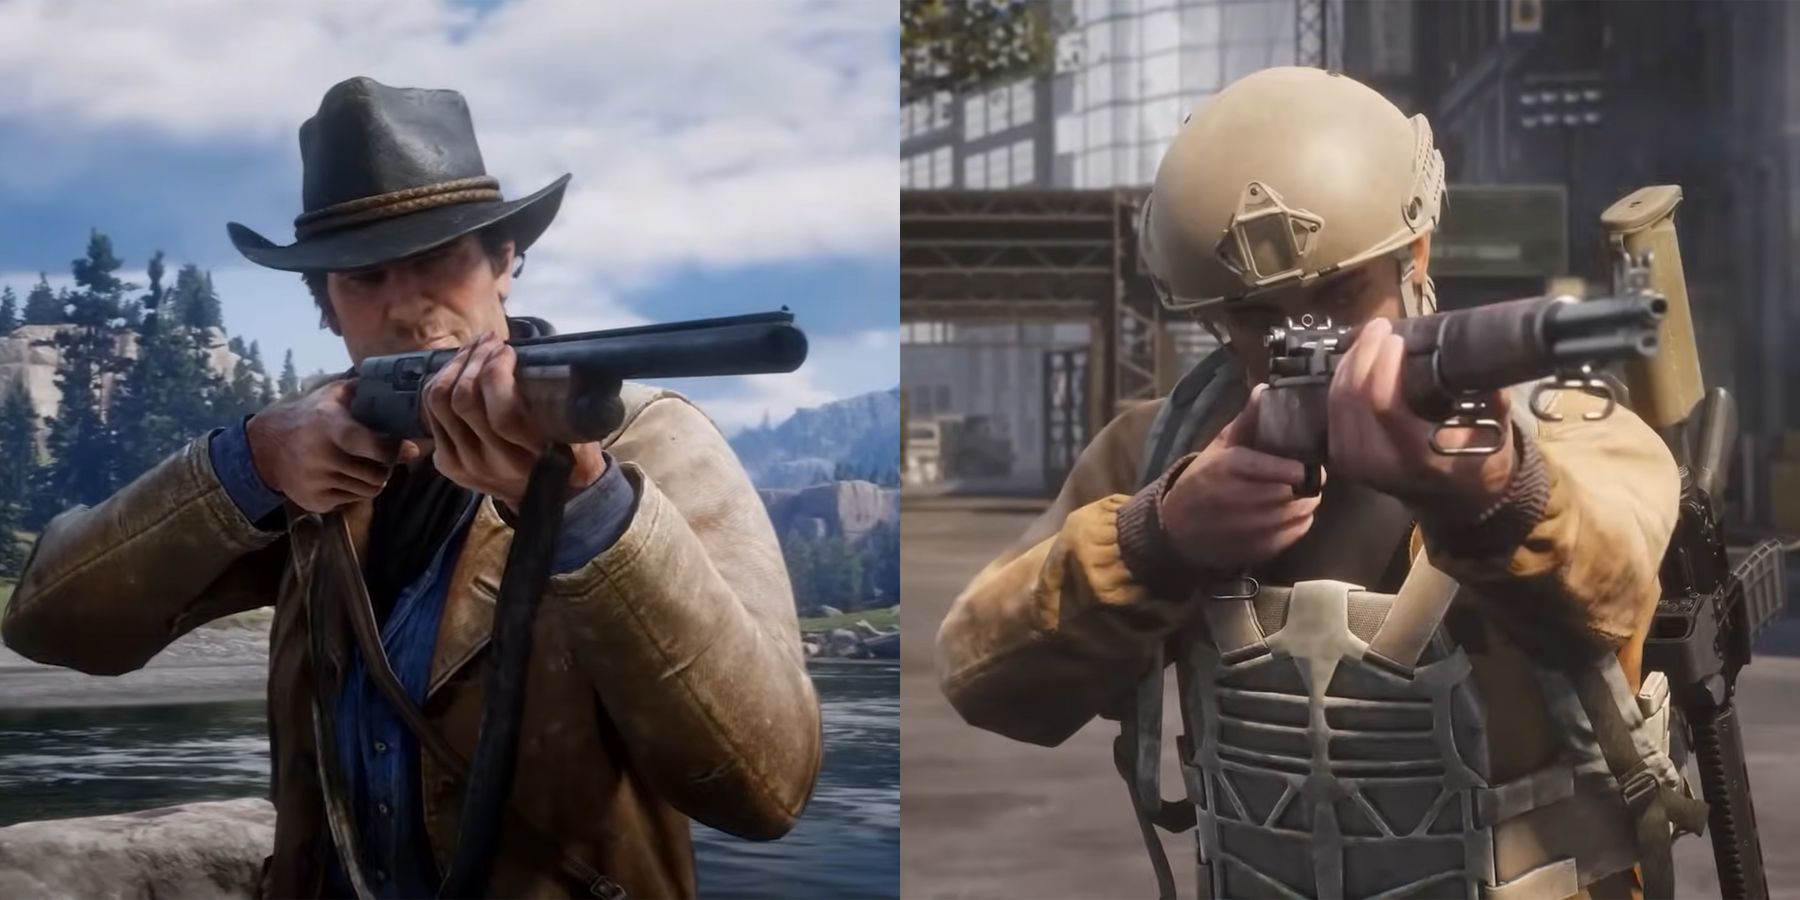 The Day Before trailer shows shot-for-shot similarity to Call of